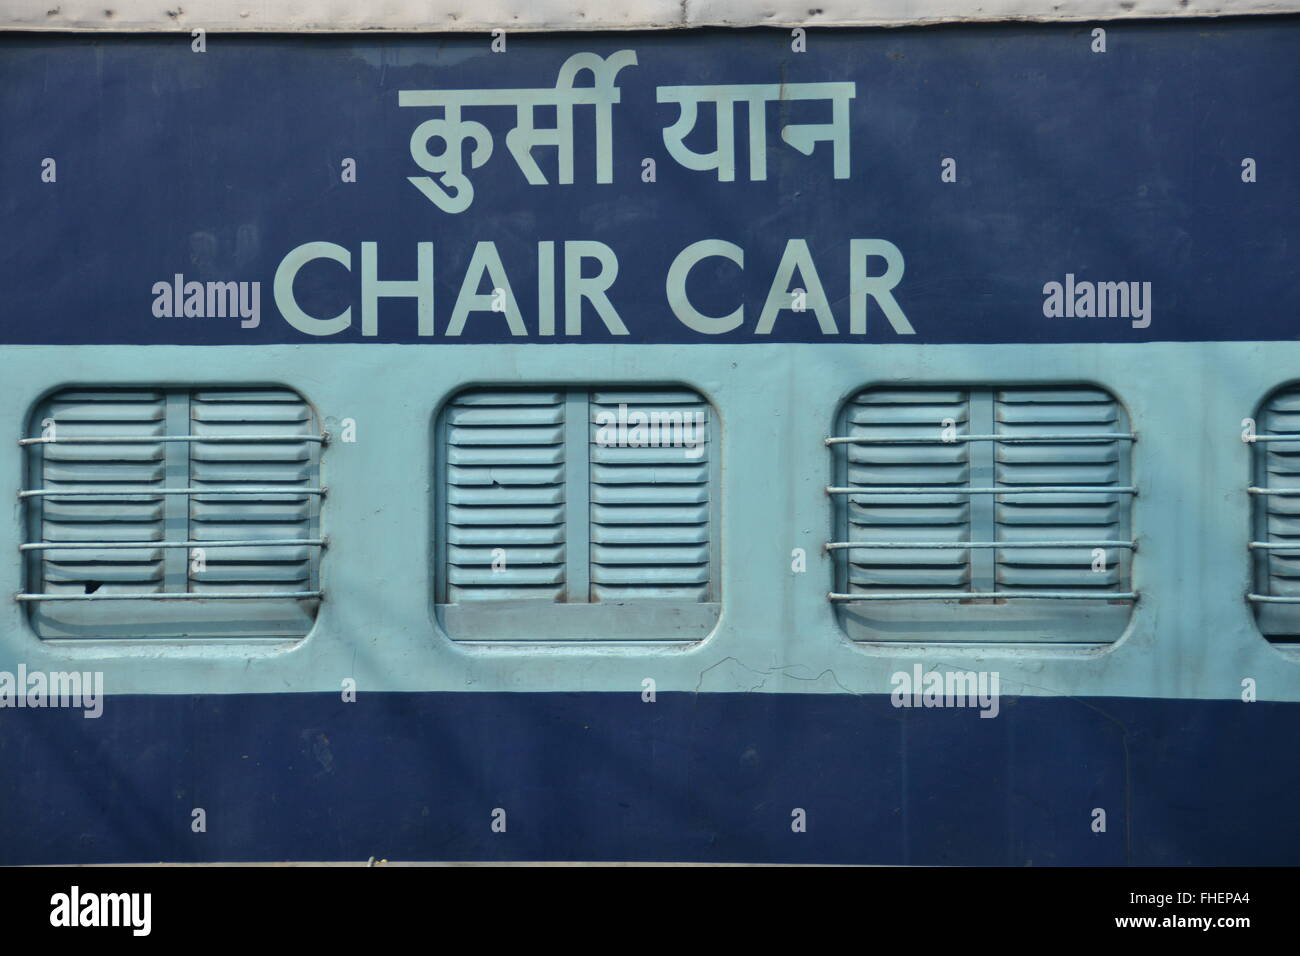 Chair Car High Resolution Stock Photography and Images - Alamy